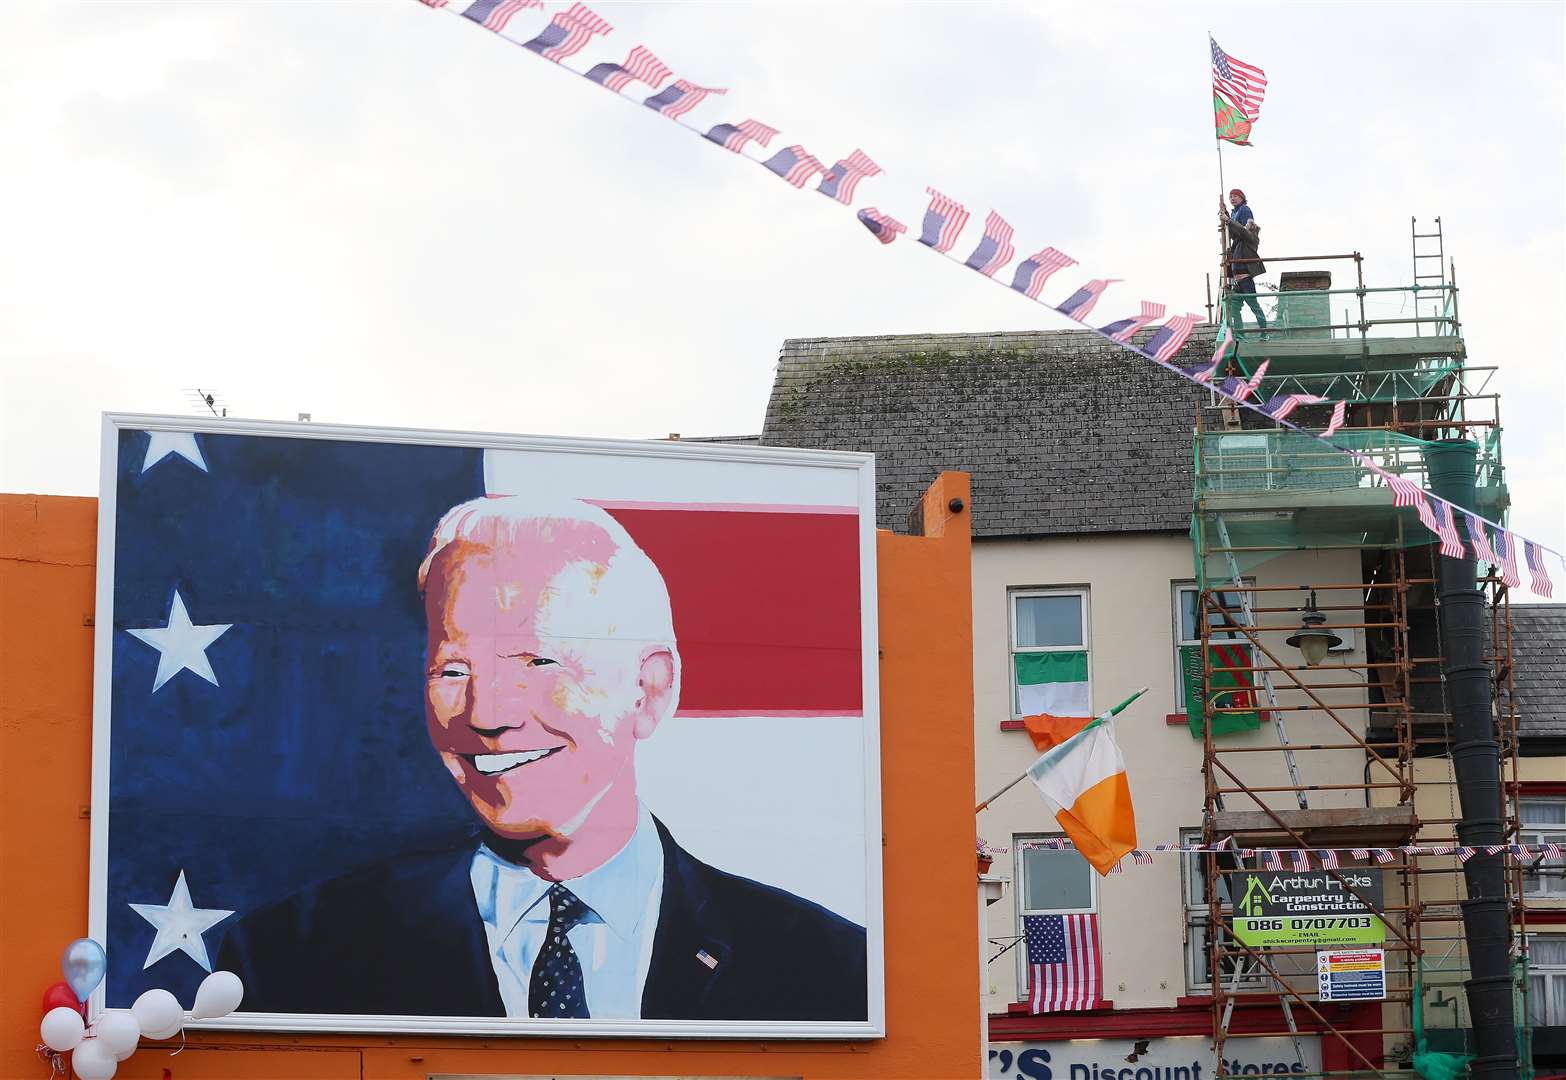 Men erect flags on top of a building in Ballina (Brian Lawless/PA)